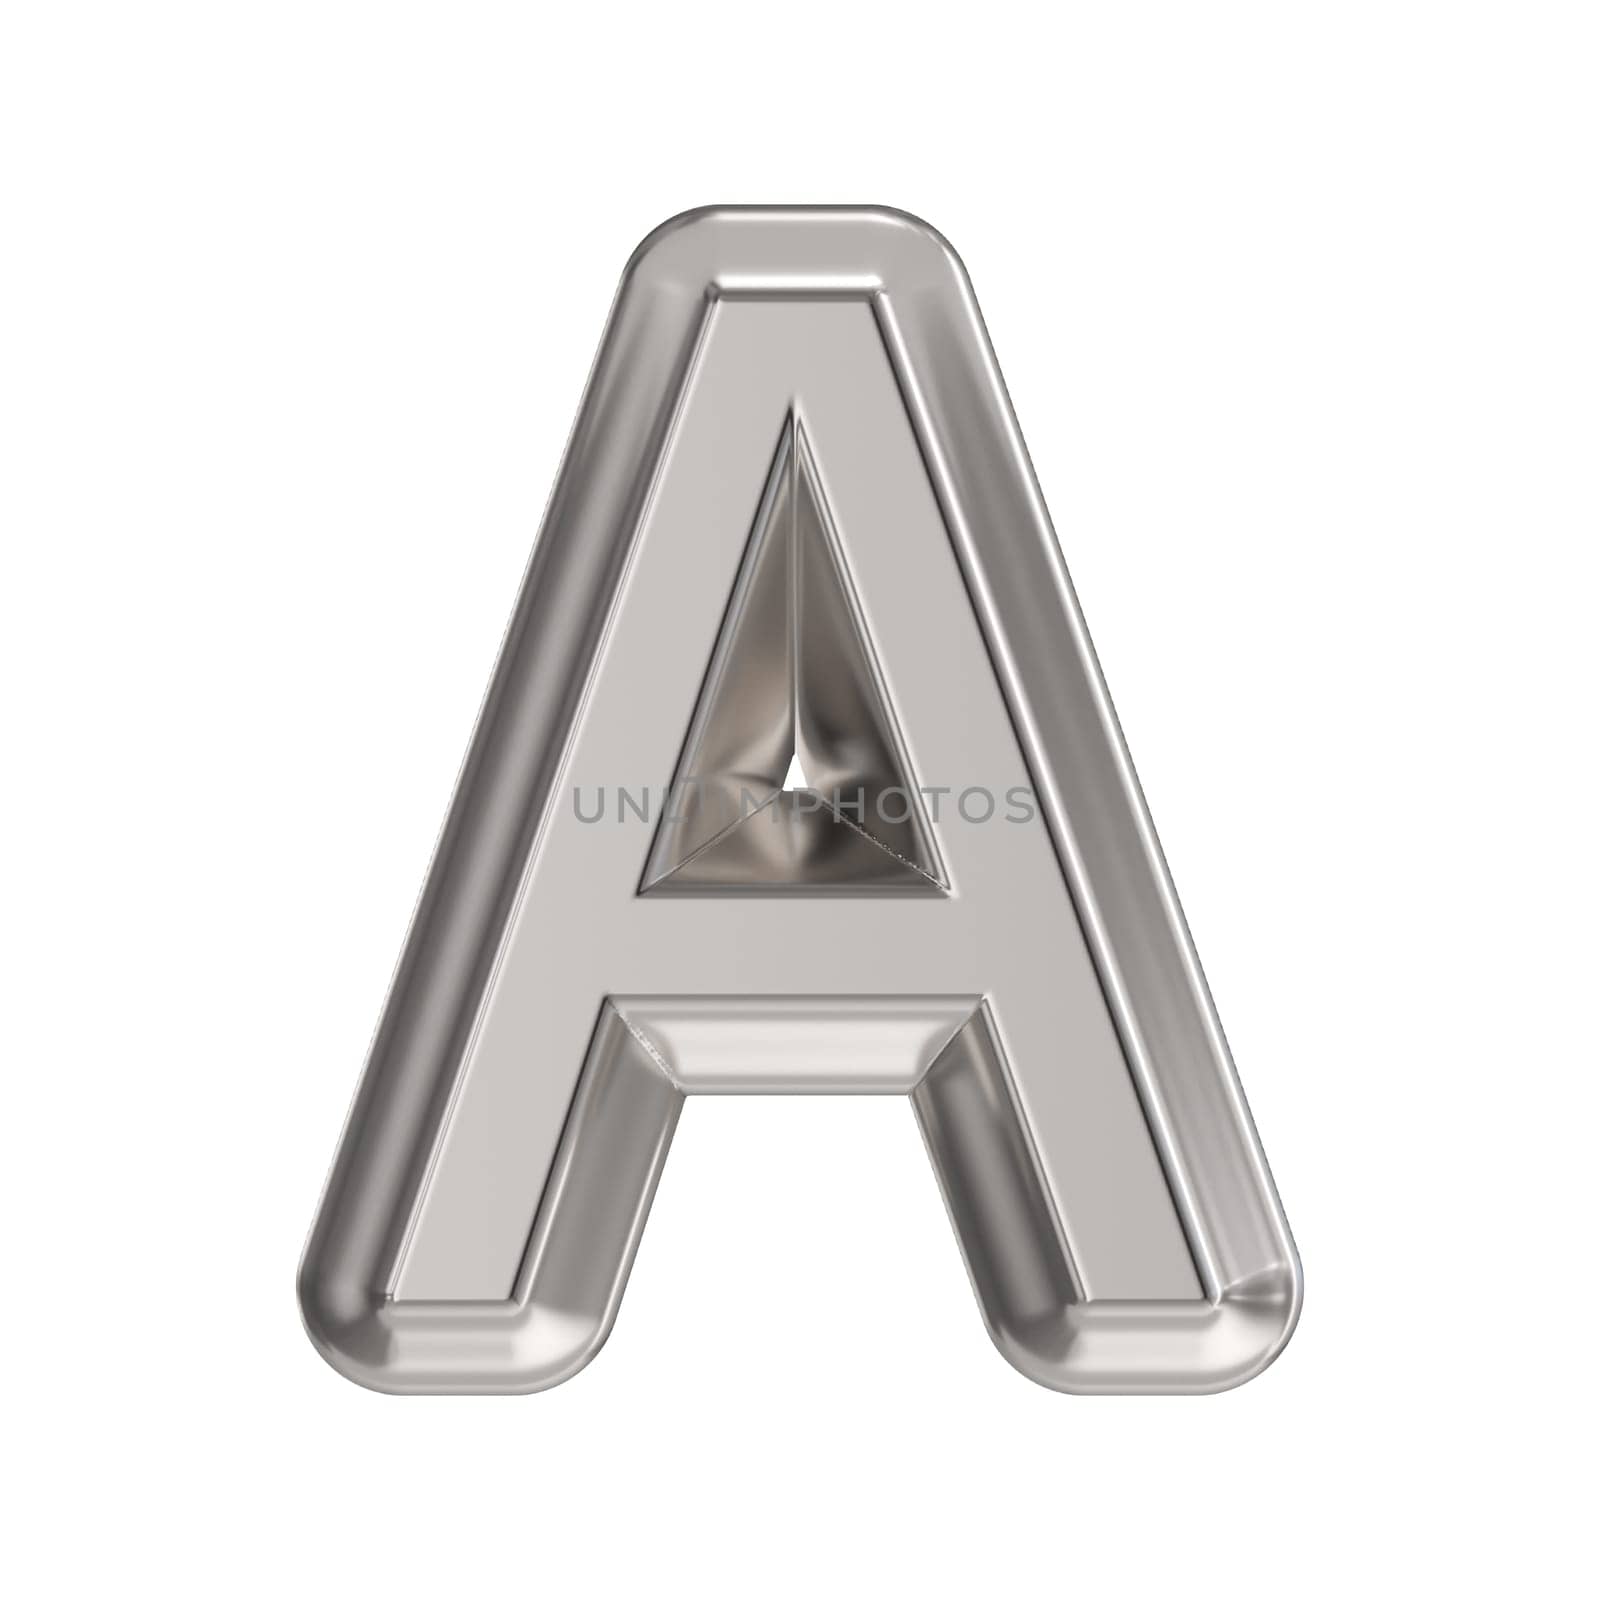 Steel font Letter A 3D rendering illustration isolated on white background